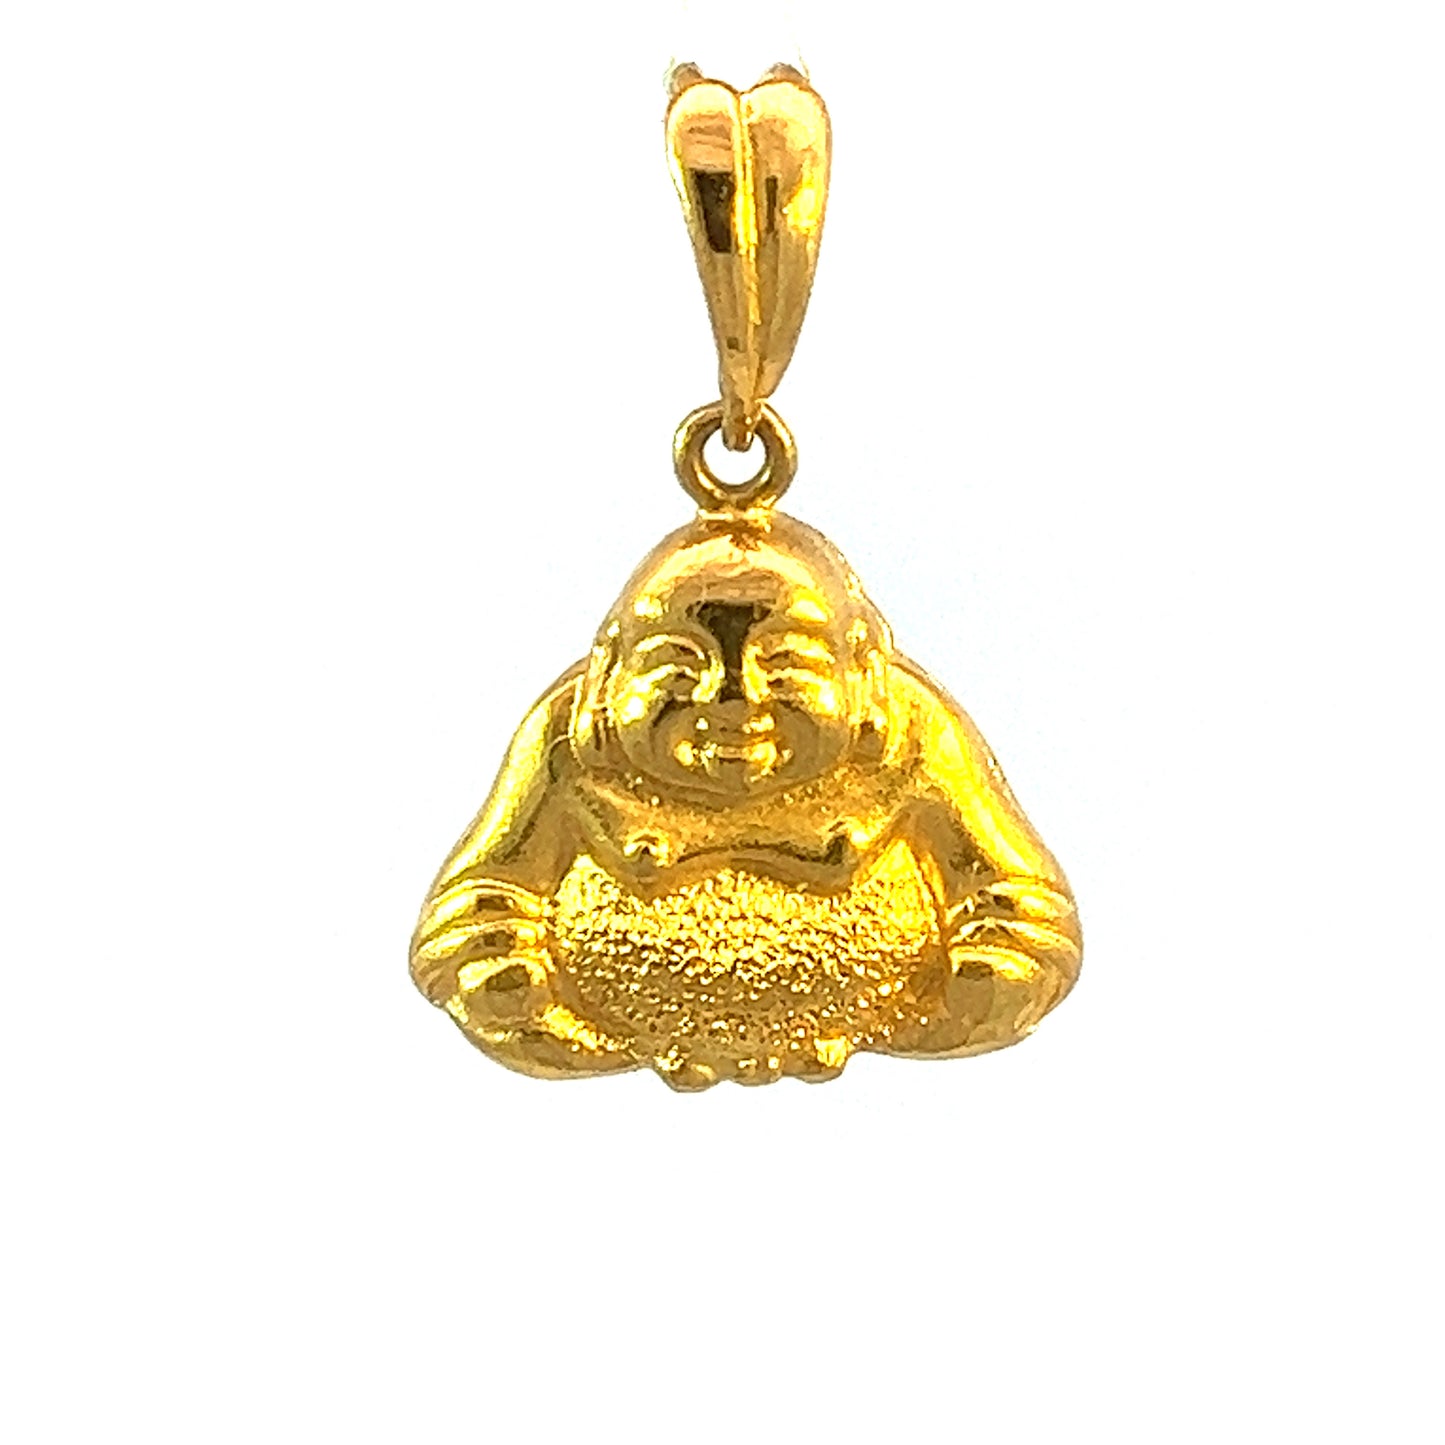 GOLD PENDANT ( 22K ) ( 3.87g ) - 0004438 Chain sold separately